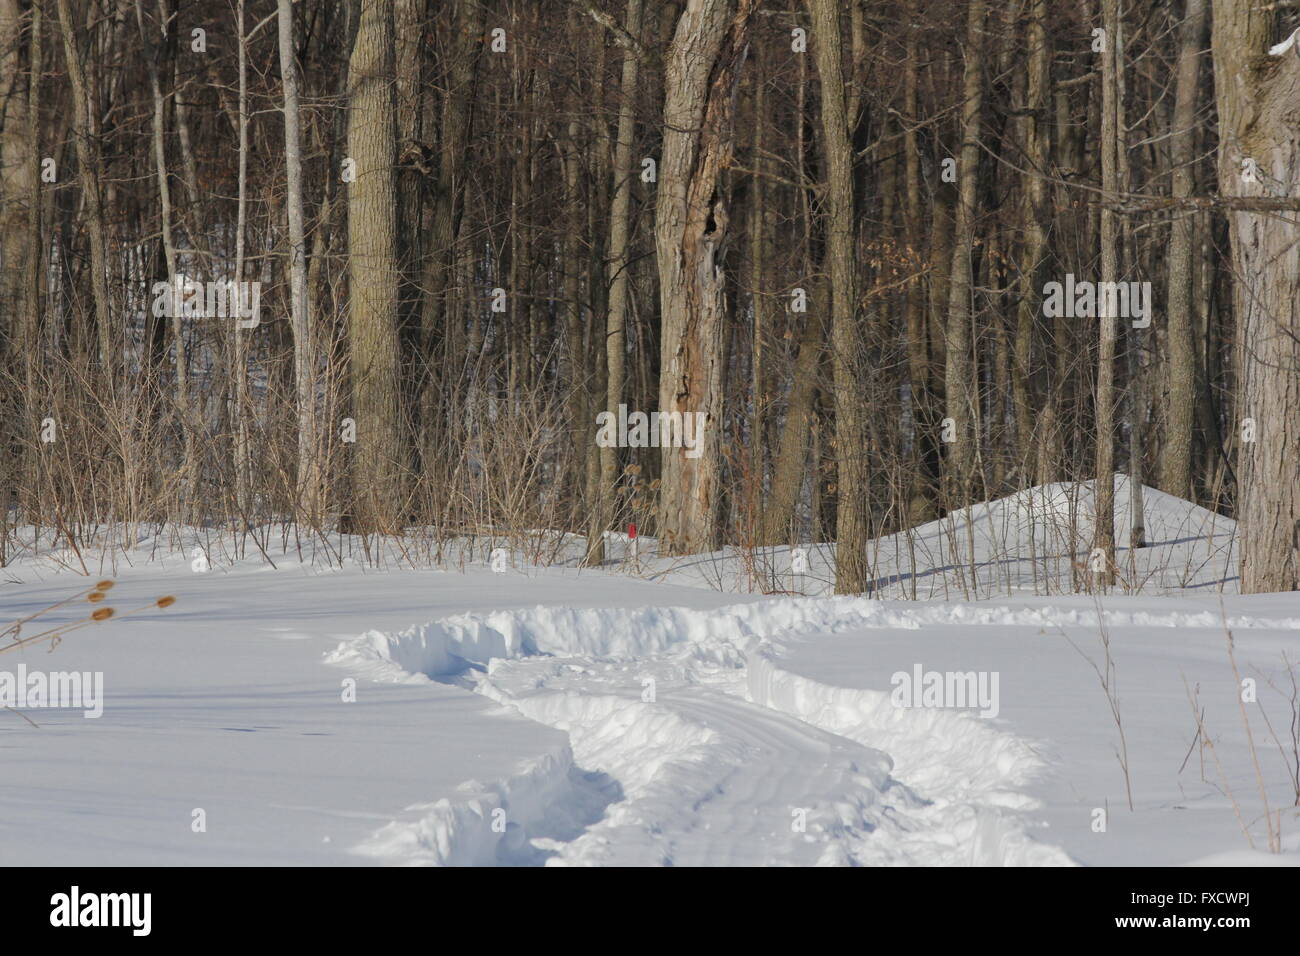 Large truck tire tracks through the thick snow by a small forested area. Stock Photo